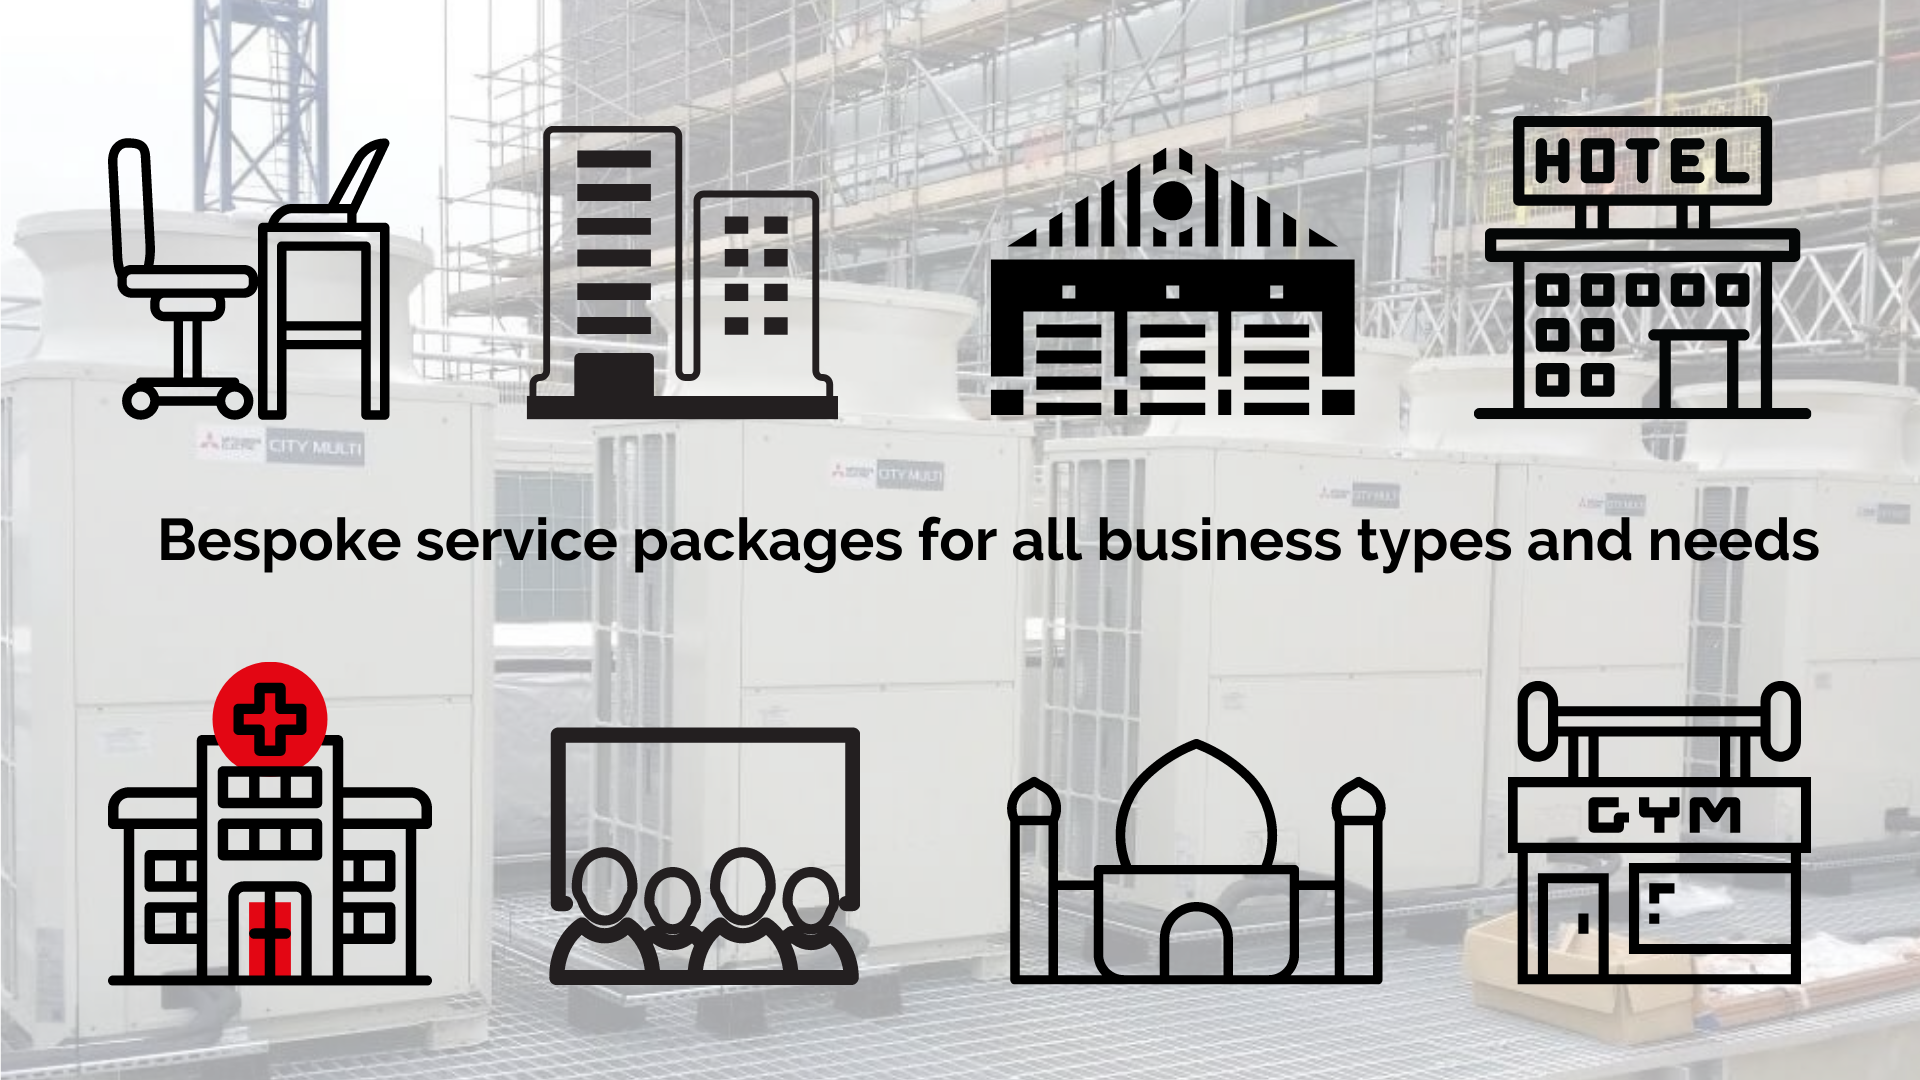 Bespoke air conditioning service packages for all business types and needs - big and small offices, warehouses, hotels, medical centres, entertainment venues, places of worship, health centres